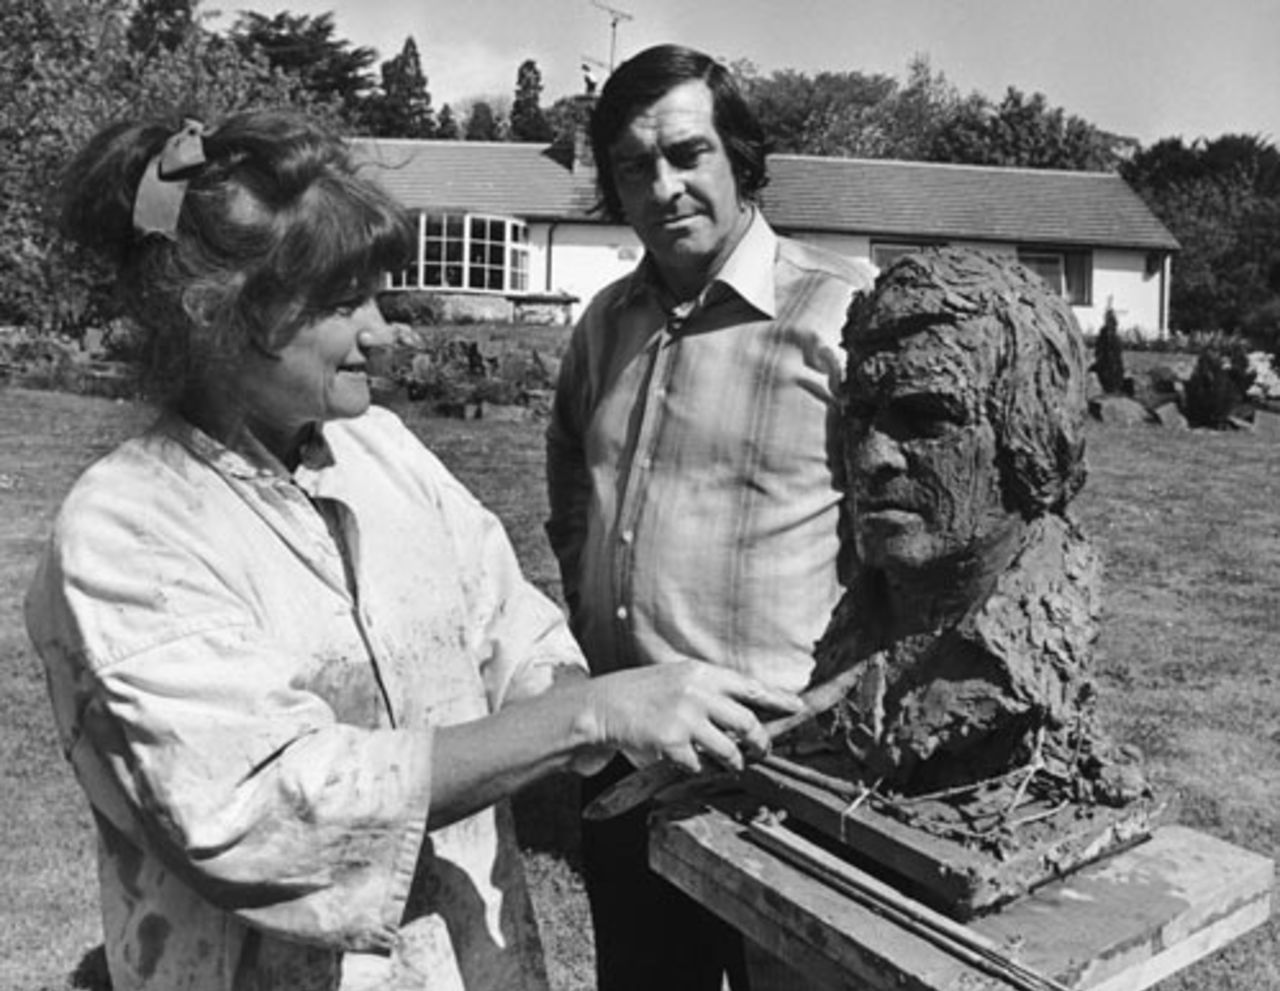 Fred Trueman looks on as Betty Miller works to complete a bust of him in the garden of his Gargrave home, June 10, 1977